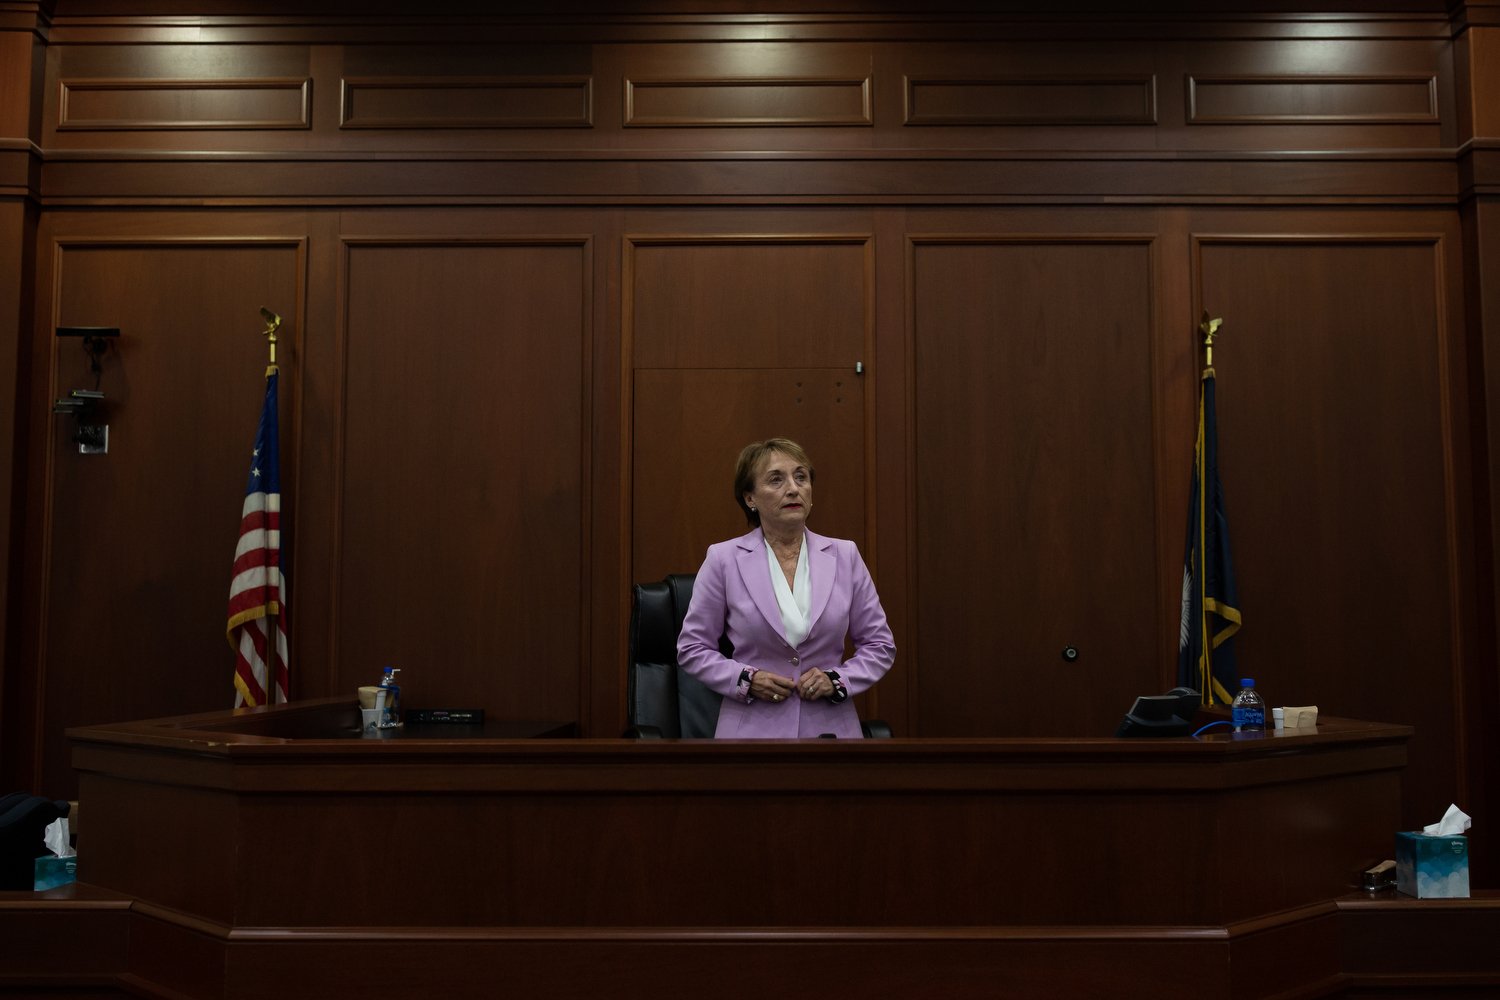  South Carolina State Supreme Court Justice Kaye Hearn stands in a courtroom at the Horry County Judicial and Administration Complex in Conway, South Carolina. Justice Hearn played a crucial role in helping to strike down the stateÕs six-week abortio